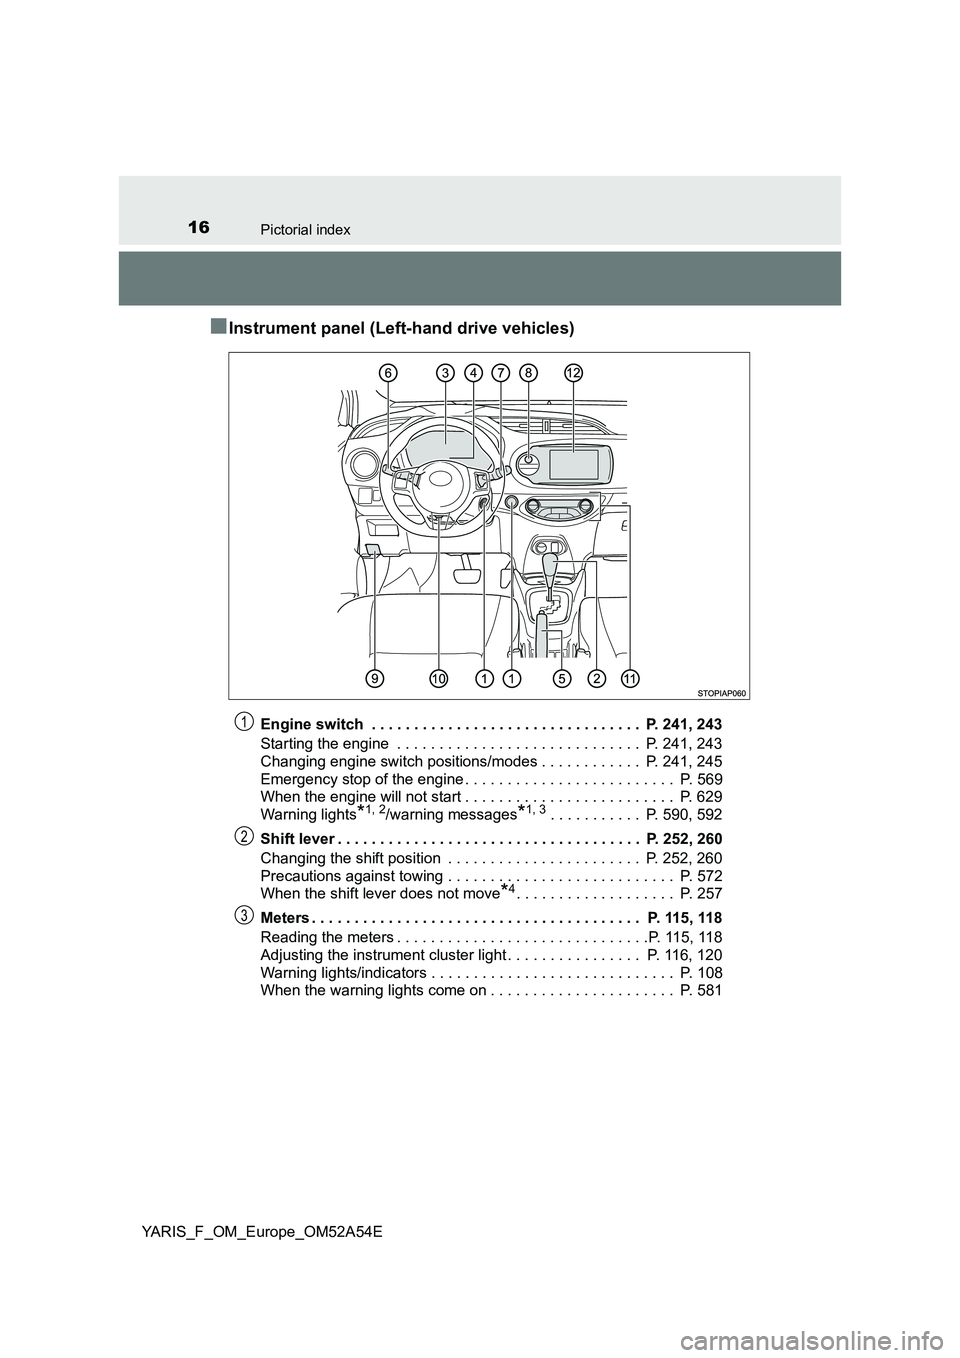 TOYOTA YARIS 2020  Owners Manual 16Pictorial index
YARIS_F_OM_Europe_OM52A54E
■Instrument panel (Left-hand drive vehicles)
Engine switch  . . . . . . . . . . . . . . . . . . . . . . . . . . . . . . . .  P. 241, 243 
Starting the en